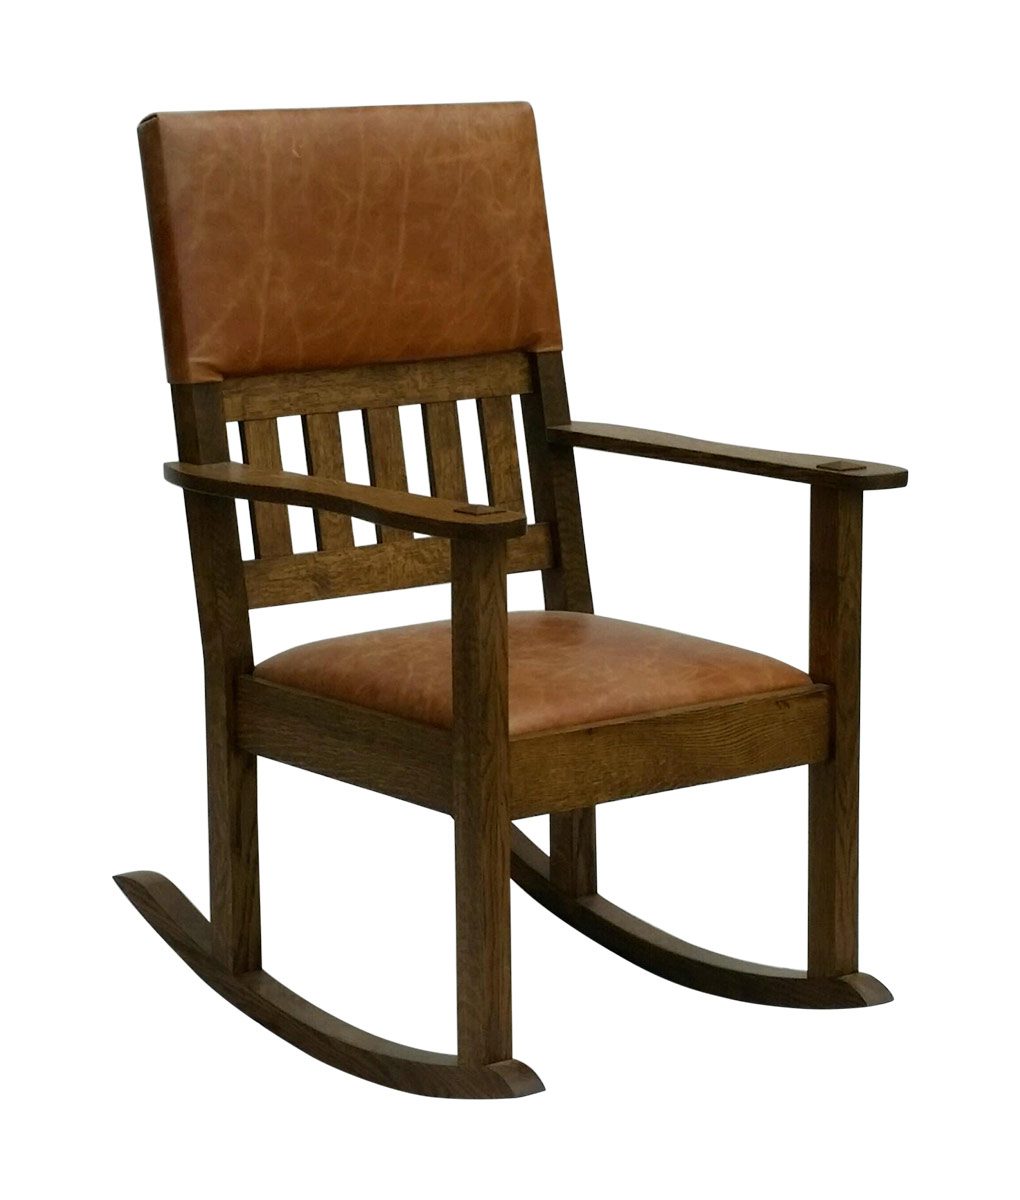 Featured image of post Mission Style Rocking Chair / Antique harden mission oak arts &amp; crafts rocking chair armchair in the gustav stickley style.